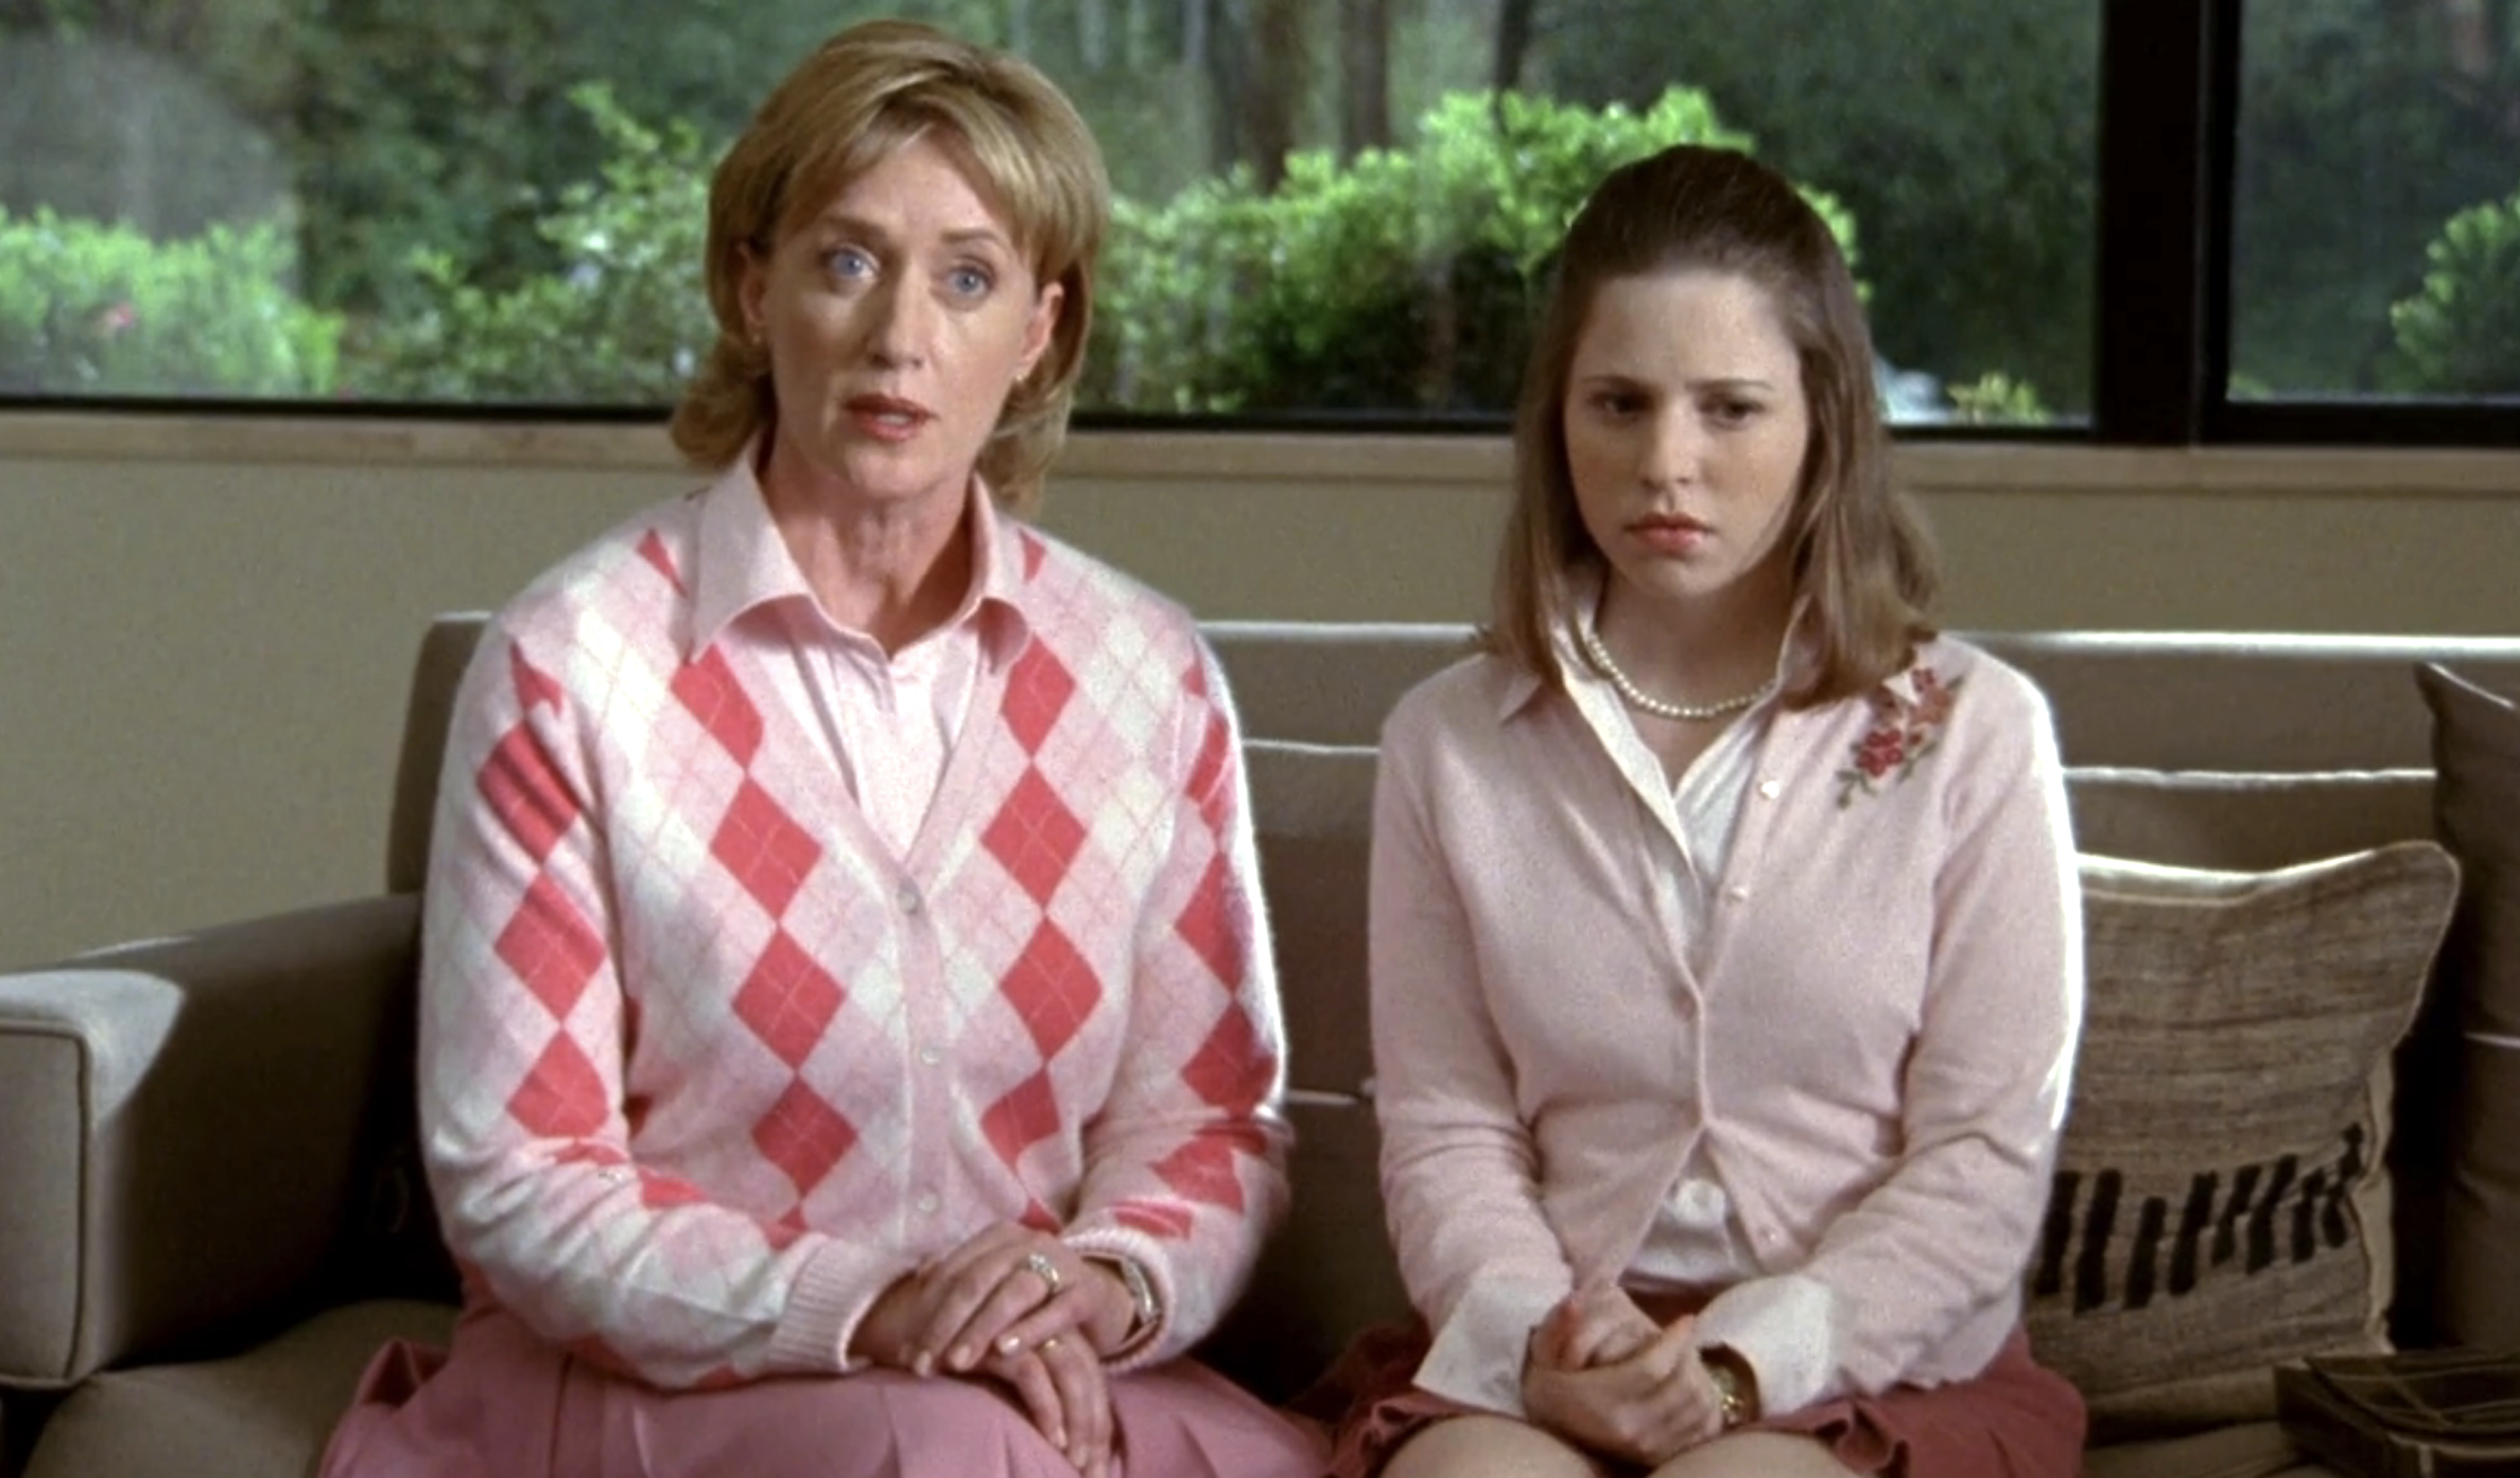 Screenshot from S1E17 of Veronica Mars. Mrs. Fuller and her daugher Sabrina are both dressed conservatively and preppily, hands folded in their laps, sitting beside each other